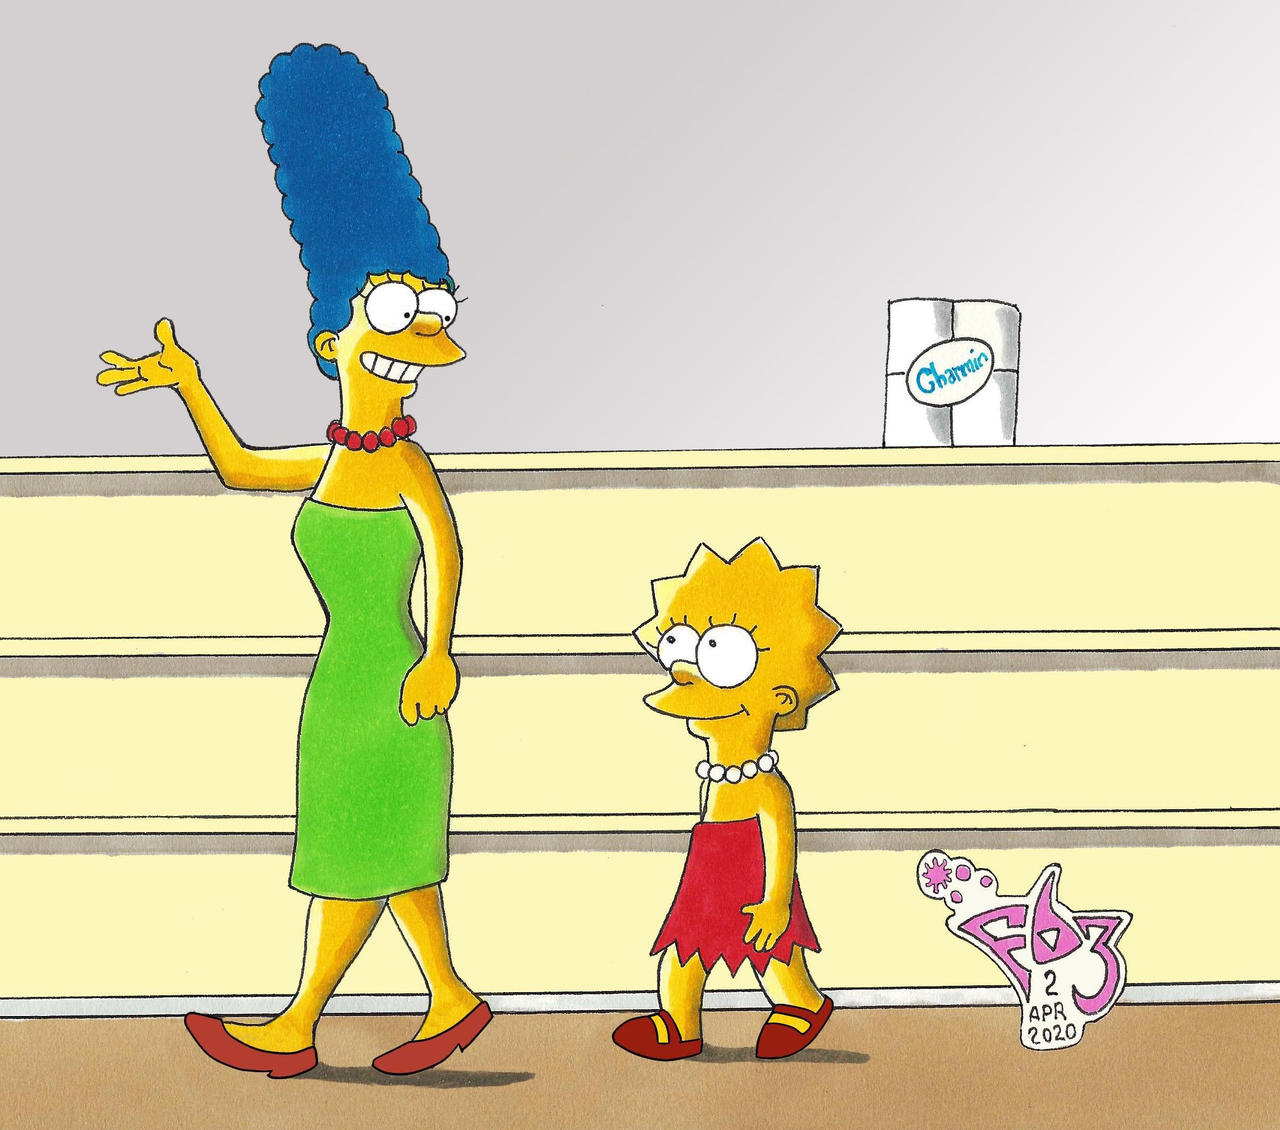 Simpson Grocery Shopping 2020 by Gulliver63 on DeviantArt